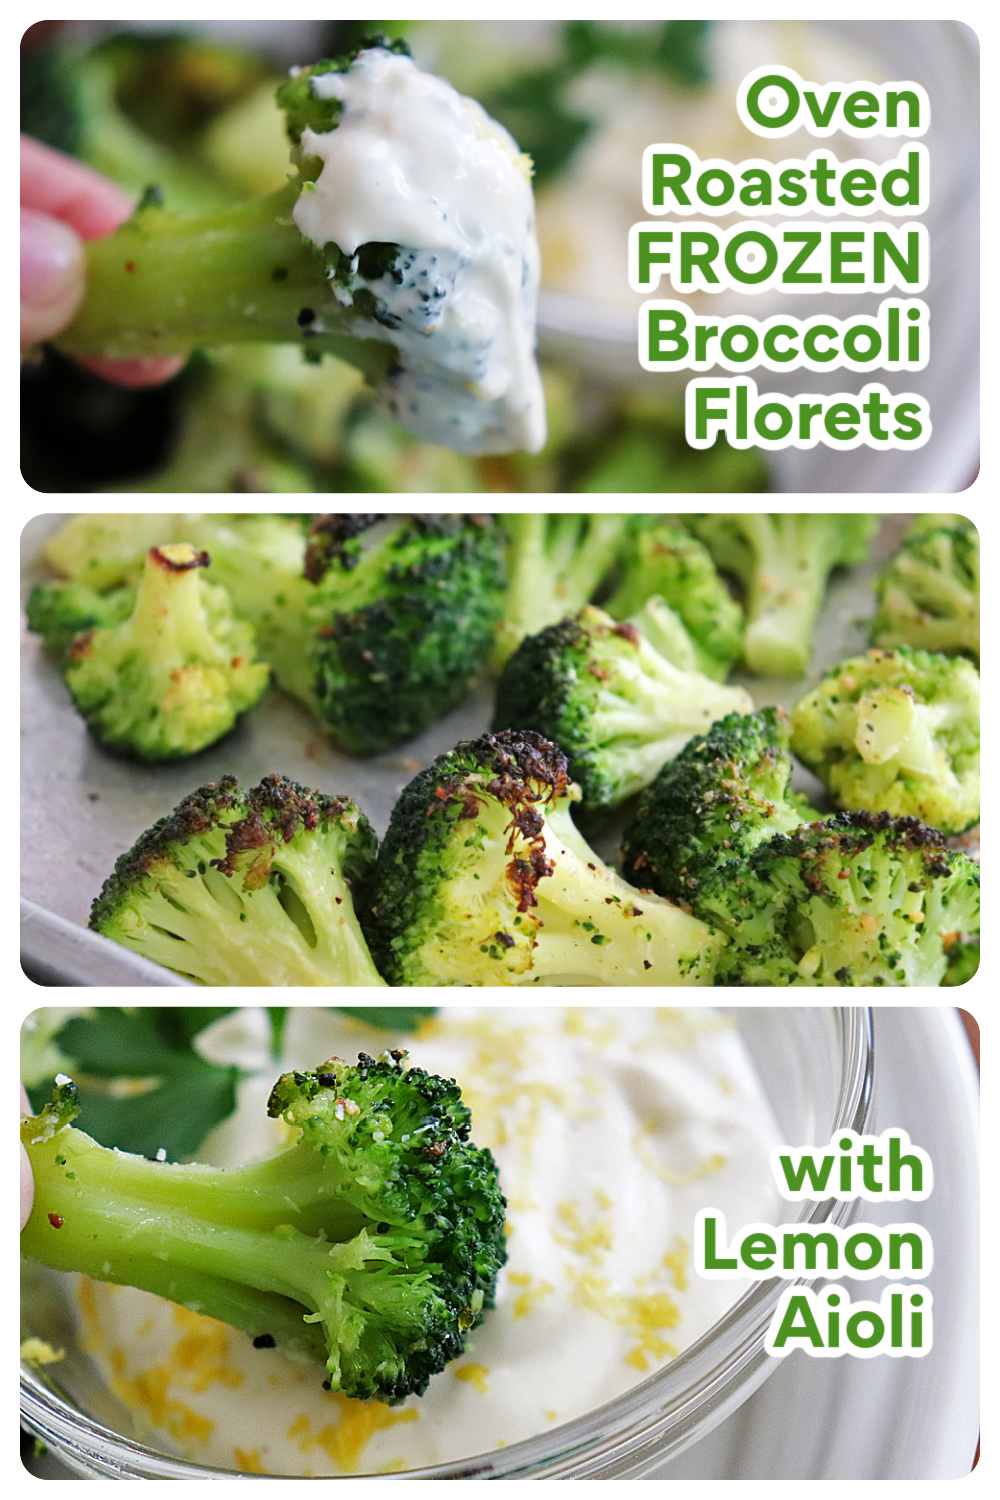 PIN for Crispy Oven Roasted FROZEN Broccoli